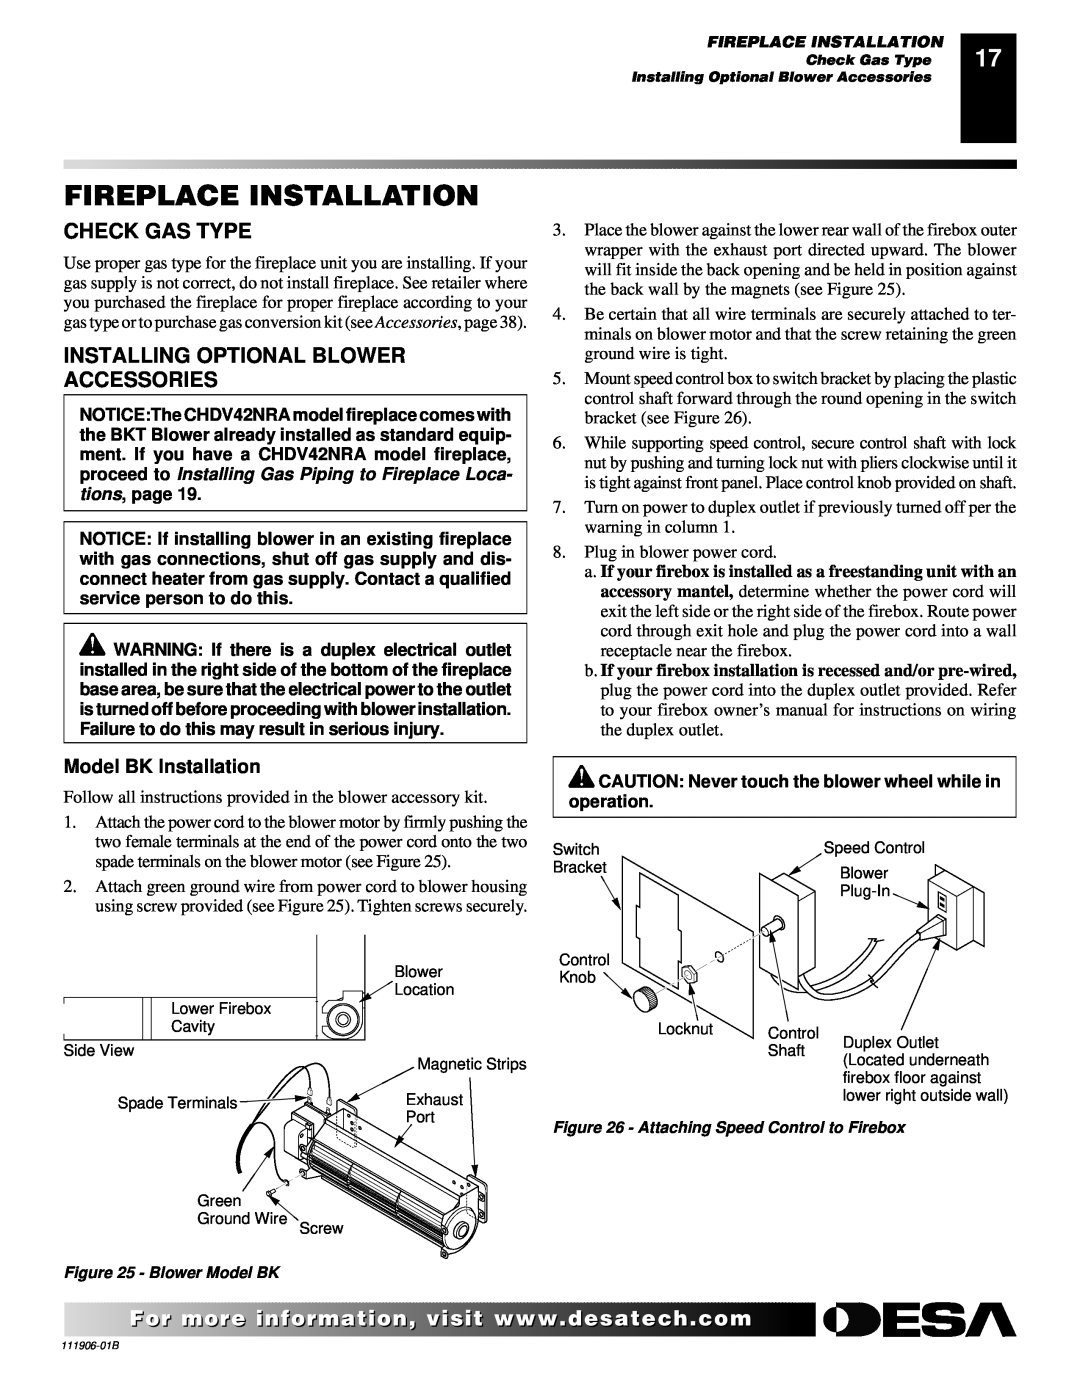 Desa CHDV42NRA, (V)V42PA(1) Fireplace Installation, Check Gas Type, Installing Optional Blower Accessories 